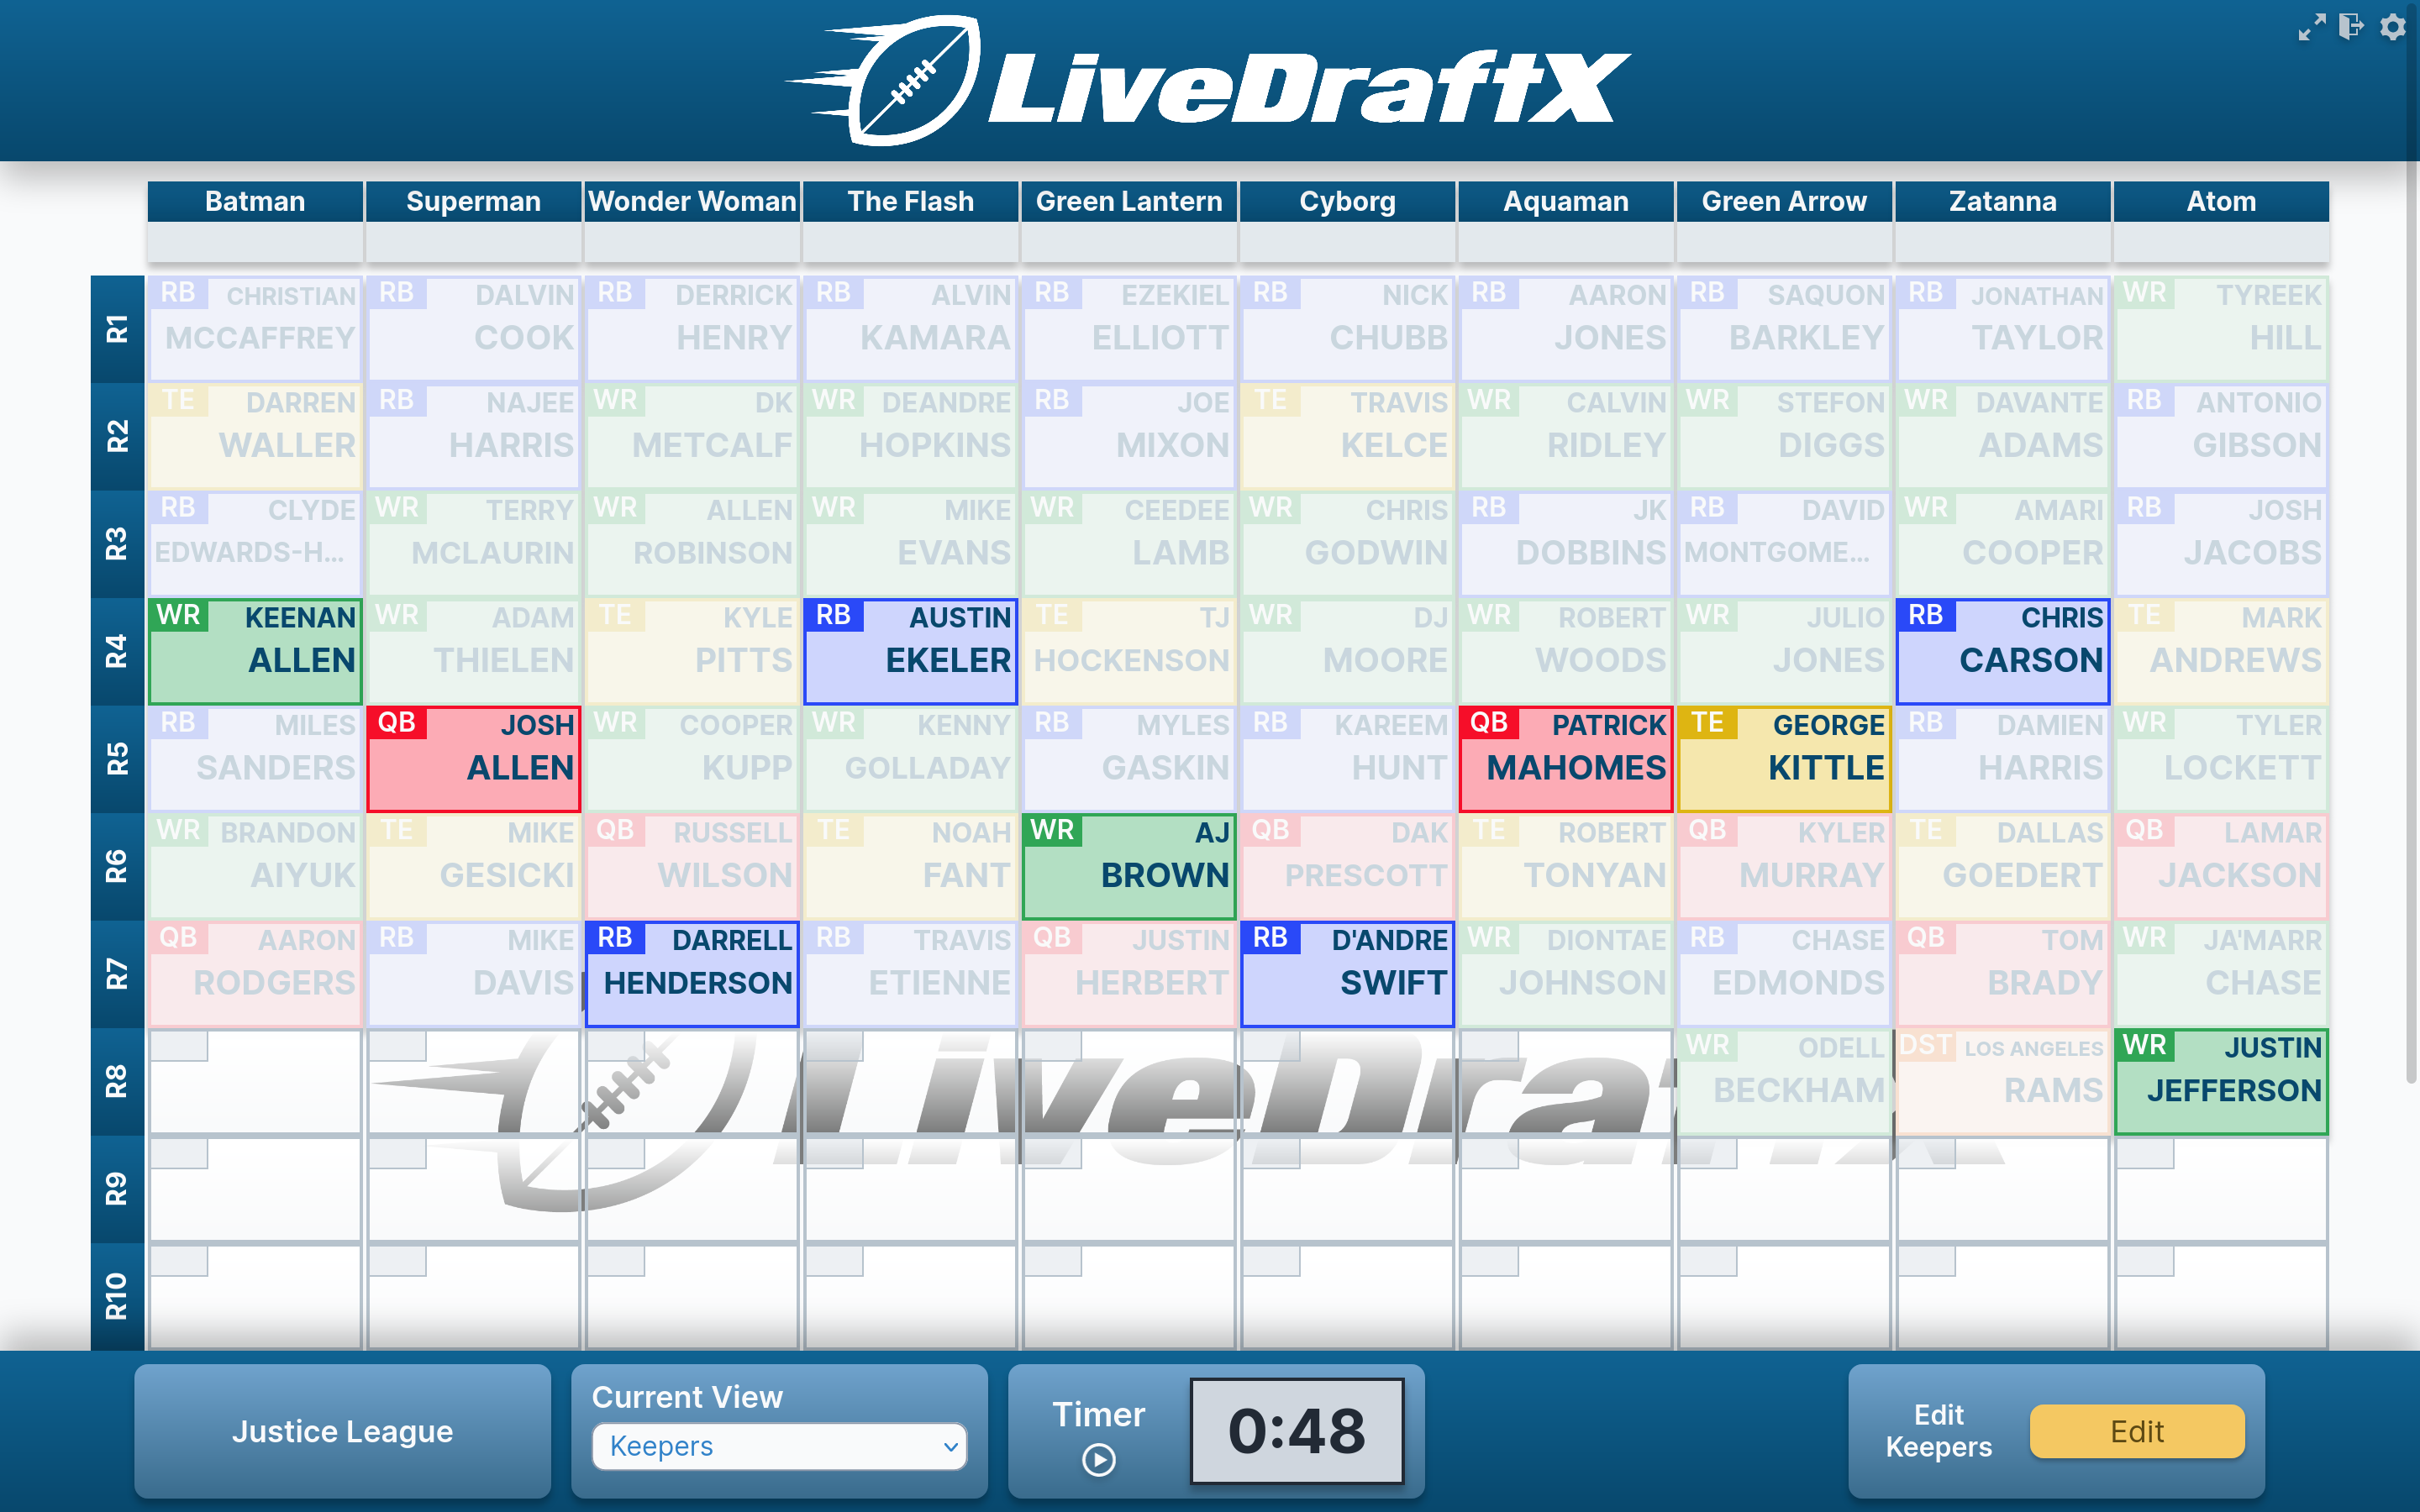 LiveDraftX Keepers View